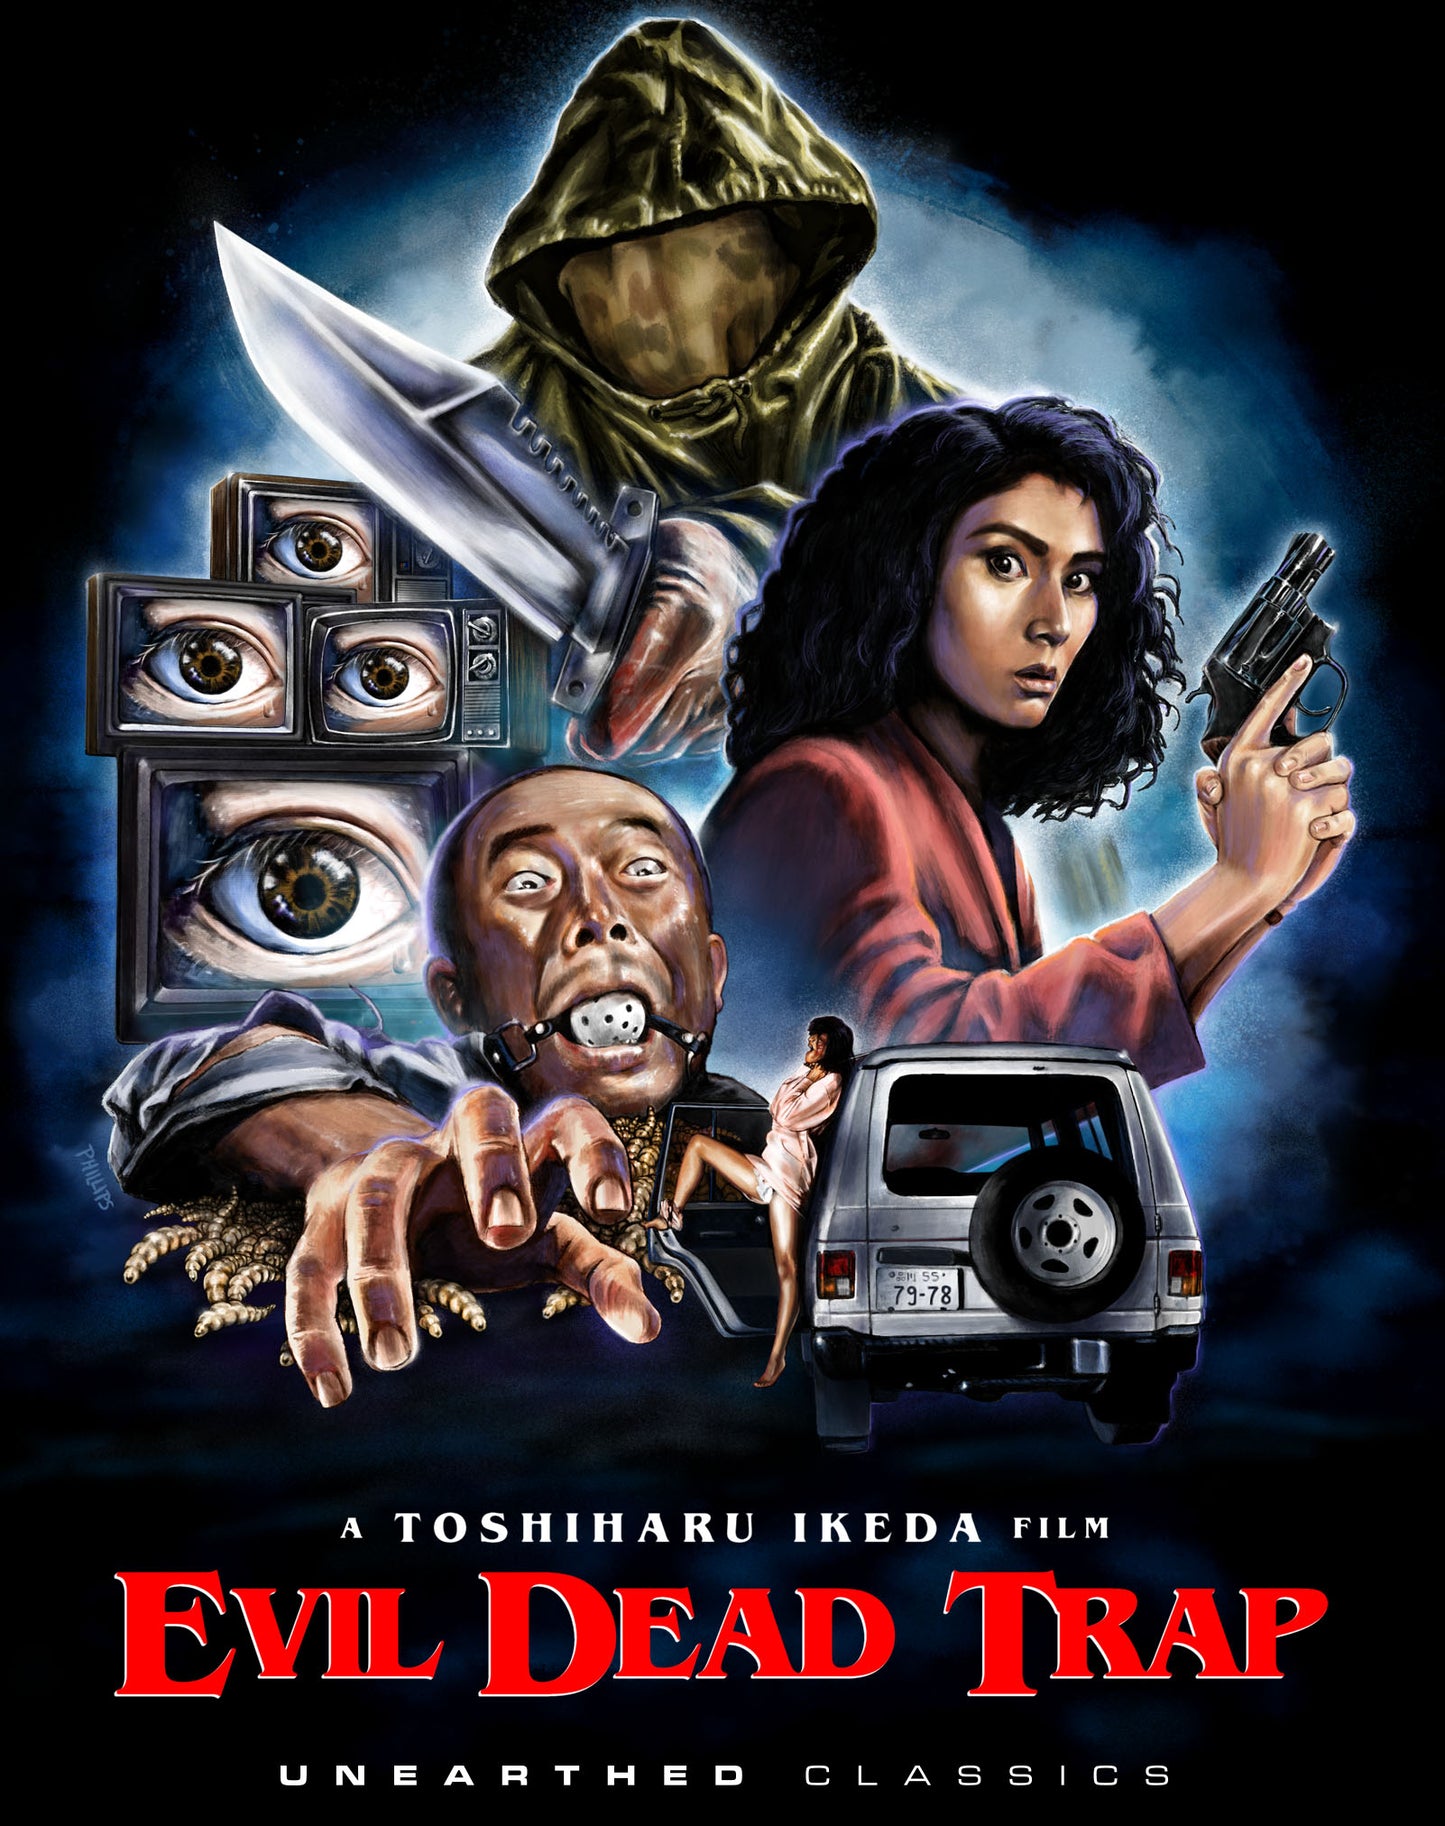 Evil Dead Trap Unearthed Films Blu-Ray [NEW] [SLIPCOVER]